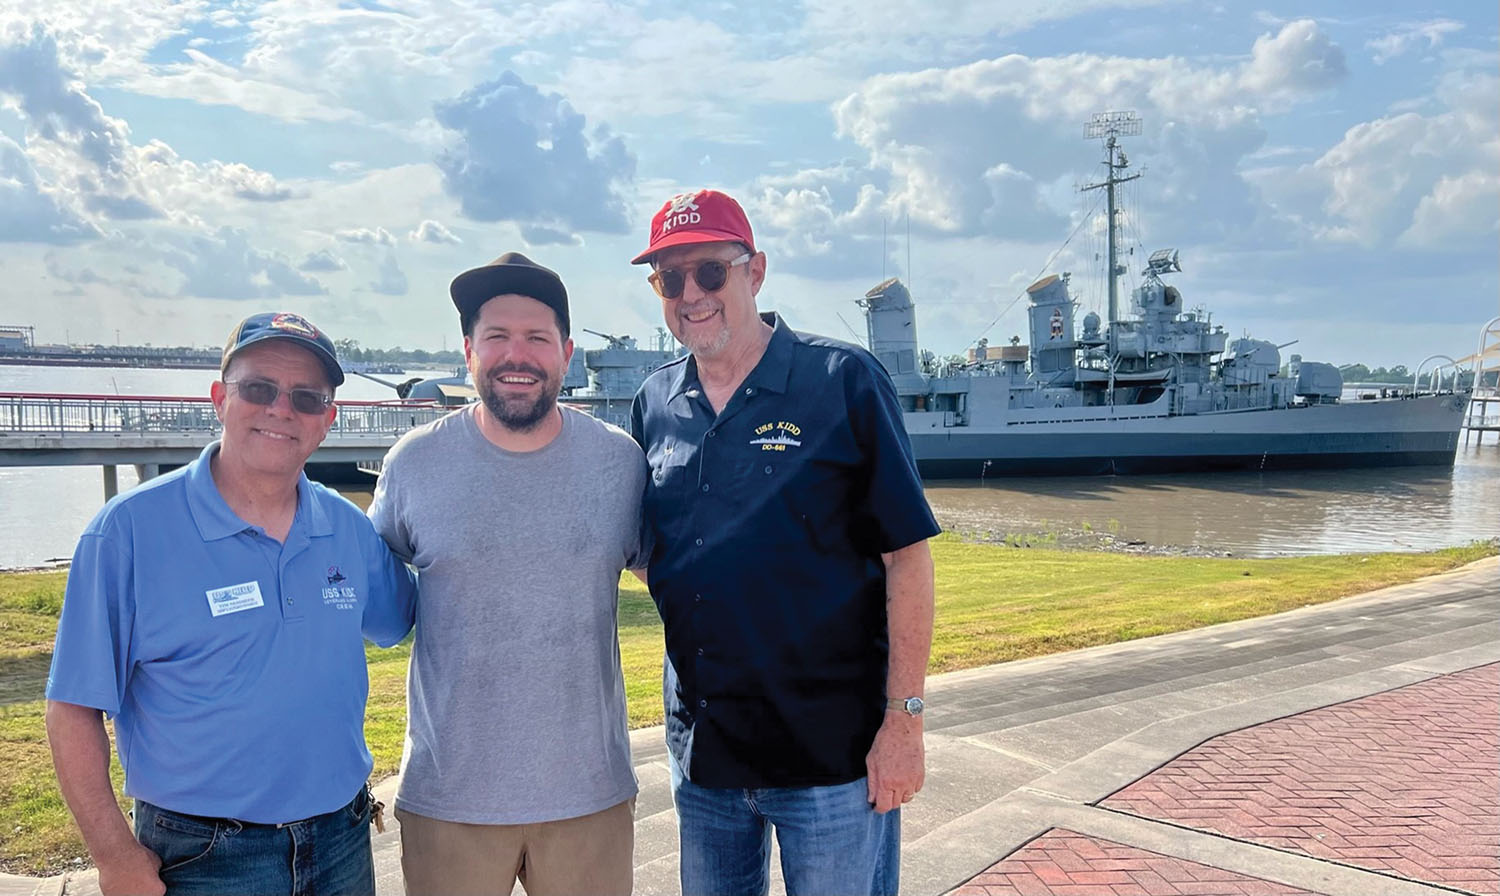 From left: Tim NesSmith, Brandon Maher and Parks Stephenson are among those involved in preparing to bring the U.S.S. Kidd to drydock and chronicling the journey in a documentary. (Photo by Elijah Otto)